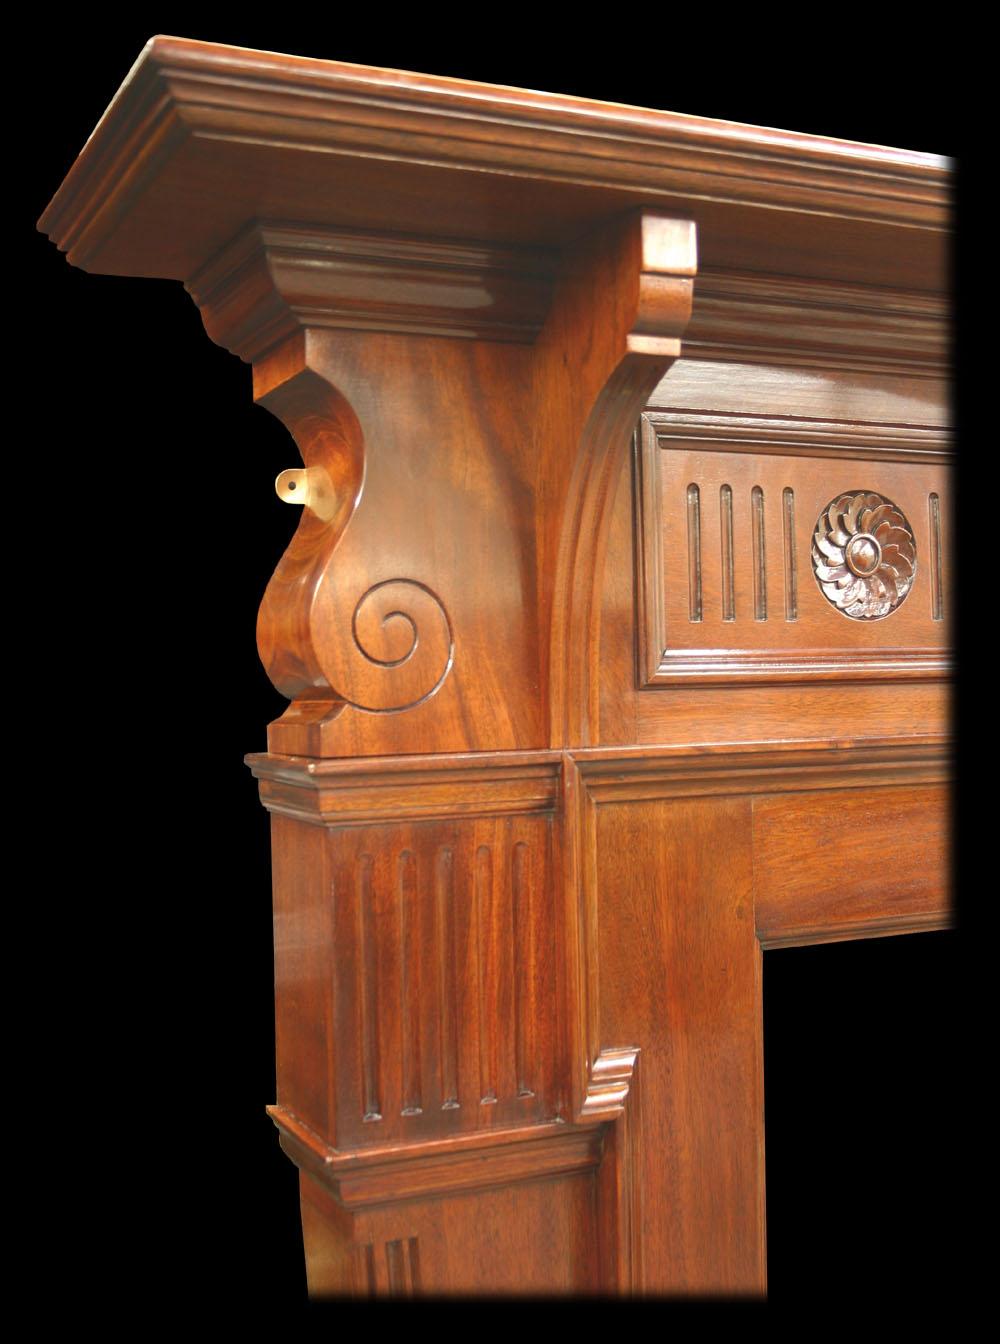 Antique Edwardian mahogany fire surround with carved swag and rosettes to the frieze and tapered legs.
This surround has been professional restored and repolished.
For detailed sizes please see the size diagram in the image gallery.